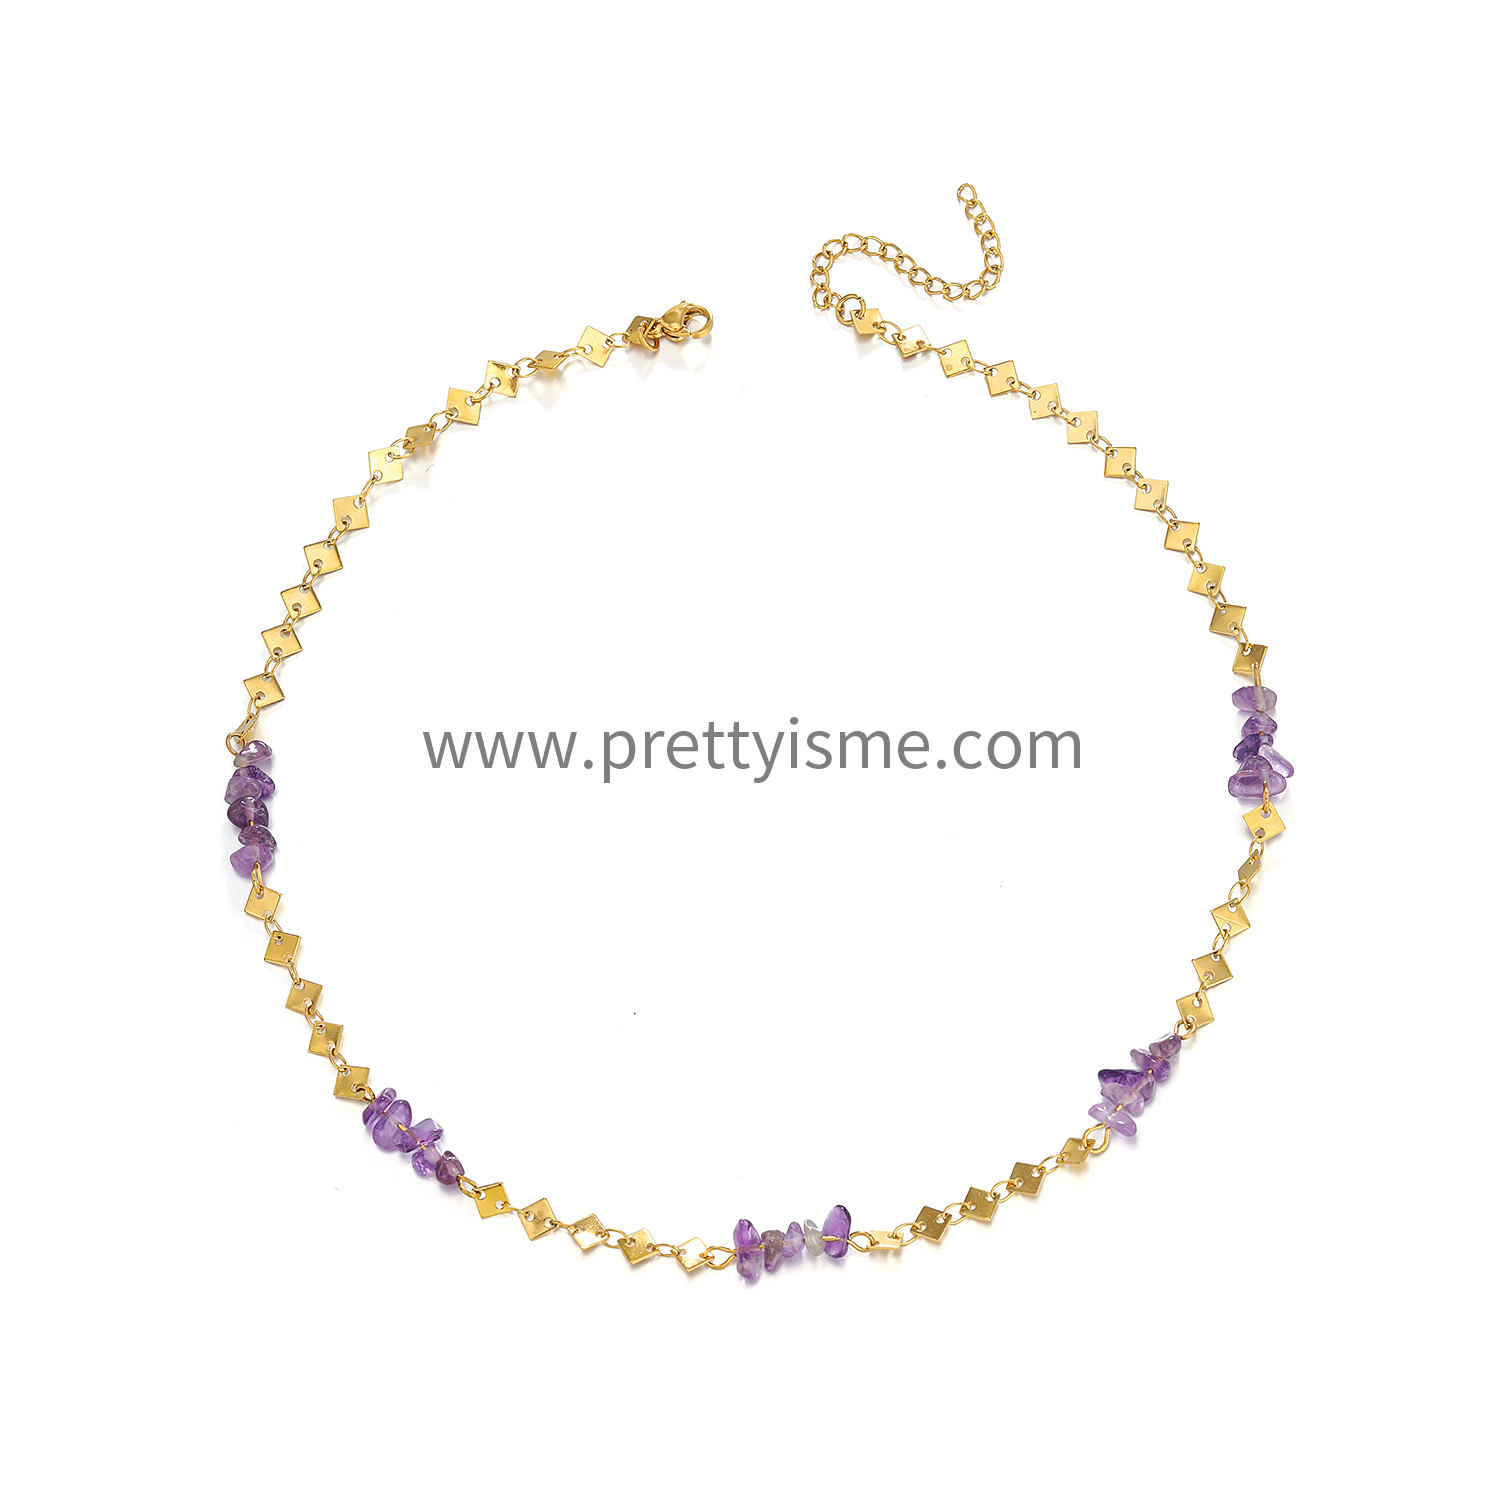 Pretty Is Me Collection Designer  18K Gold Plated Stainless Geometric Square Link Chain Purple Stone Beads Choker Necklace Women (6).webp